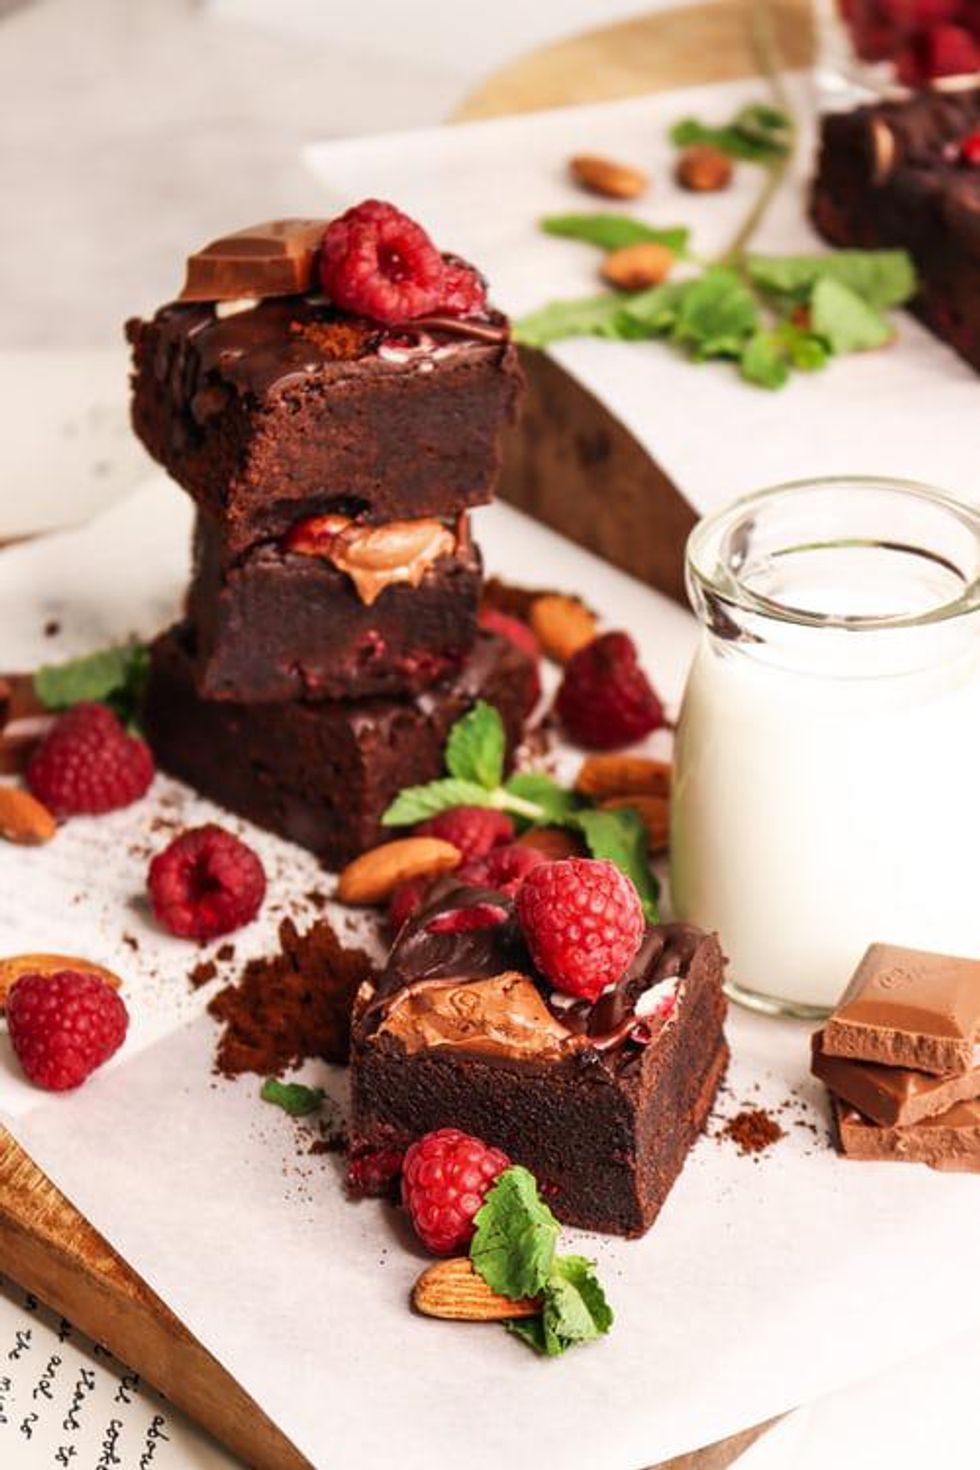 December 8th Is National Brownie Day, So Here Are 12 Unique Brownie Recipes To Help You Celebrate